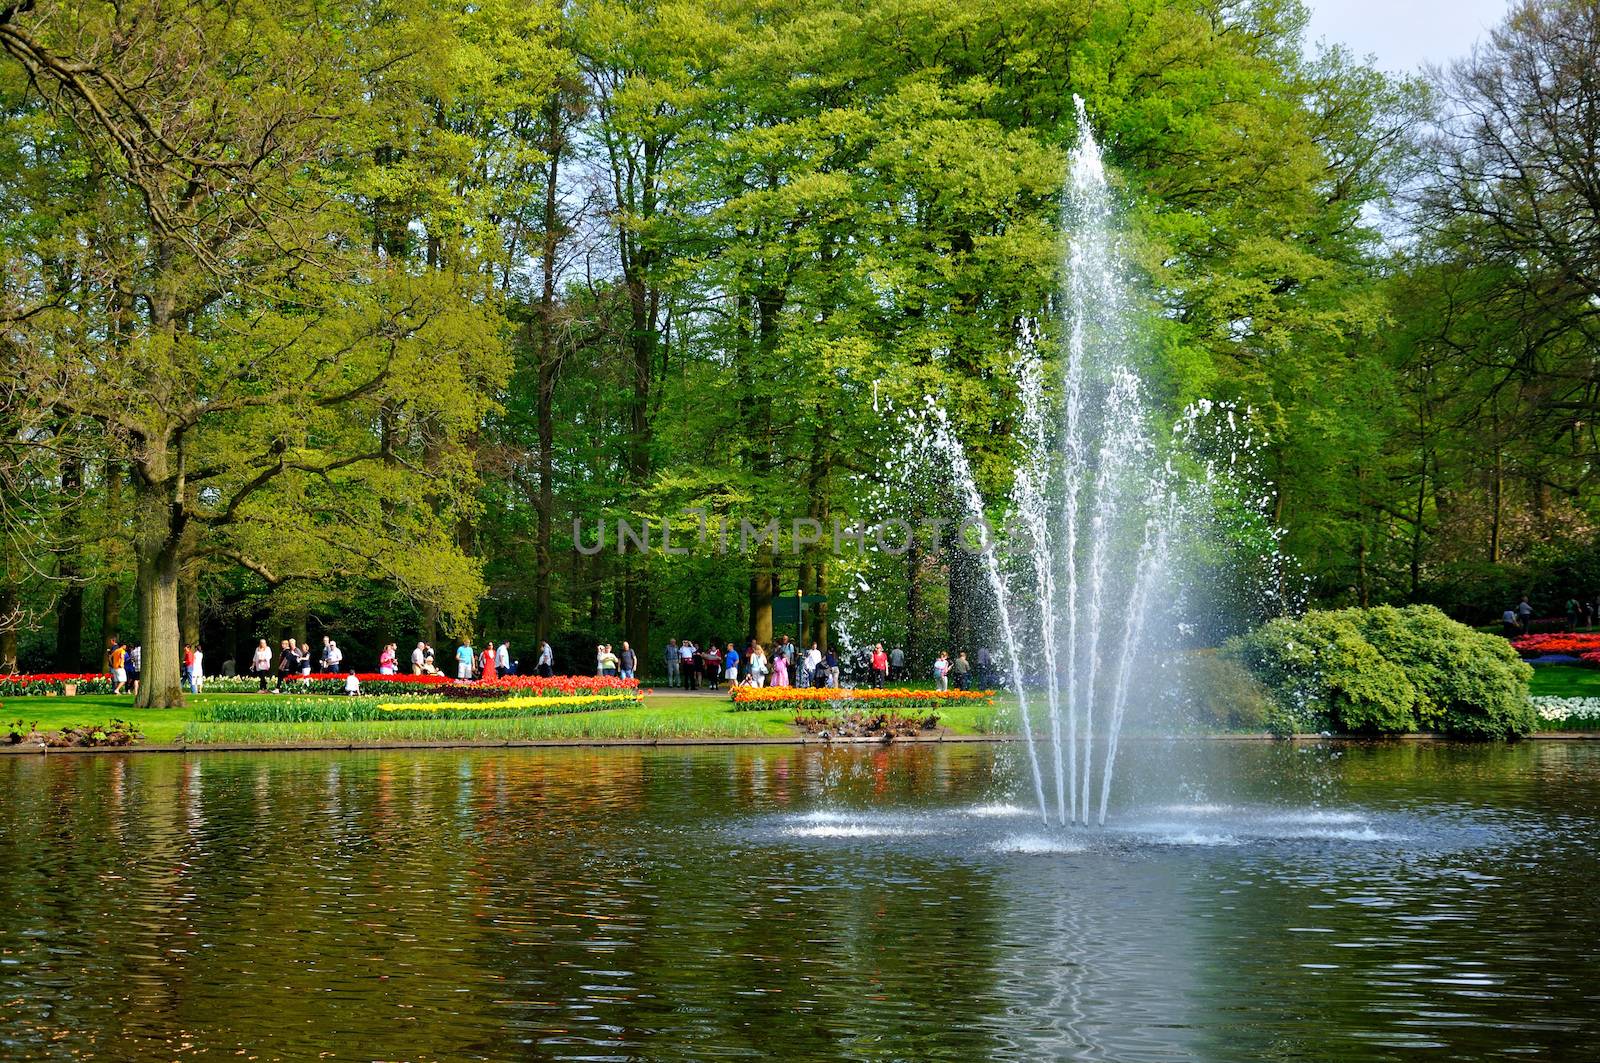 Fontain in the river in Keukenhof park in Holland by Eagle2308